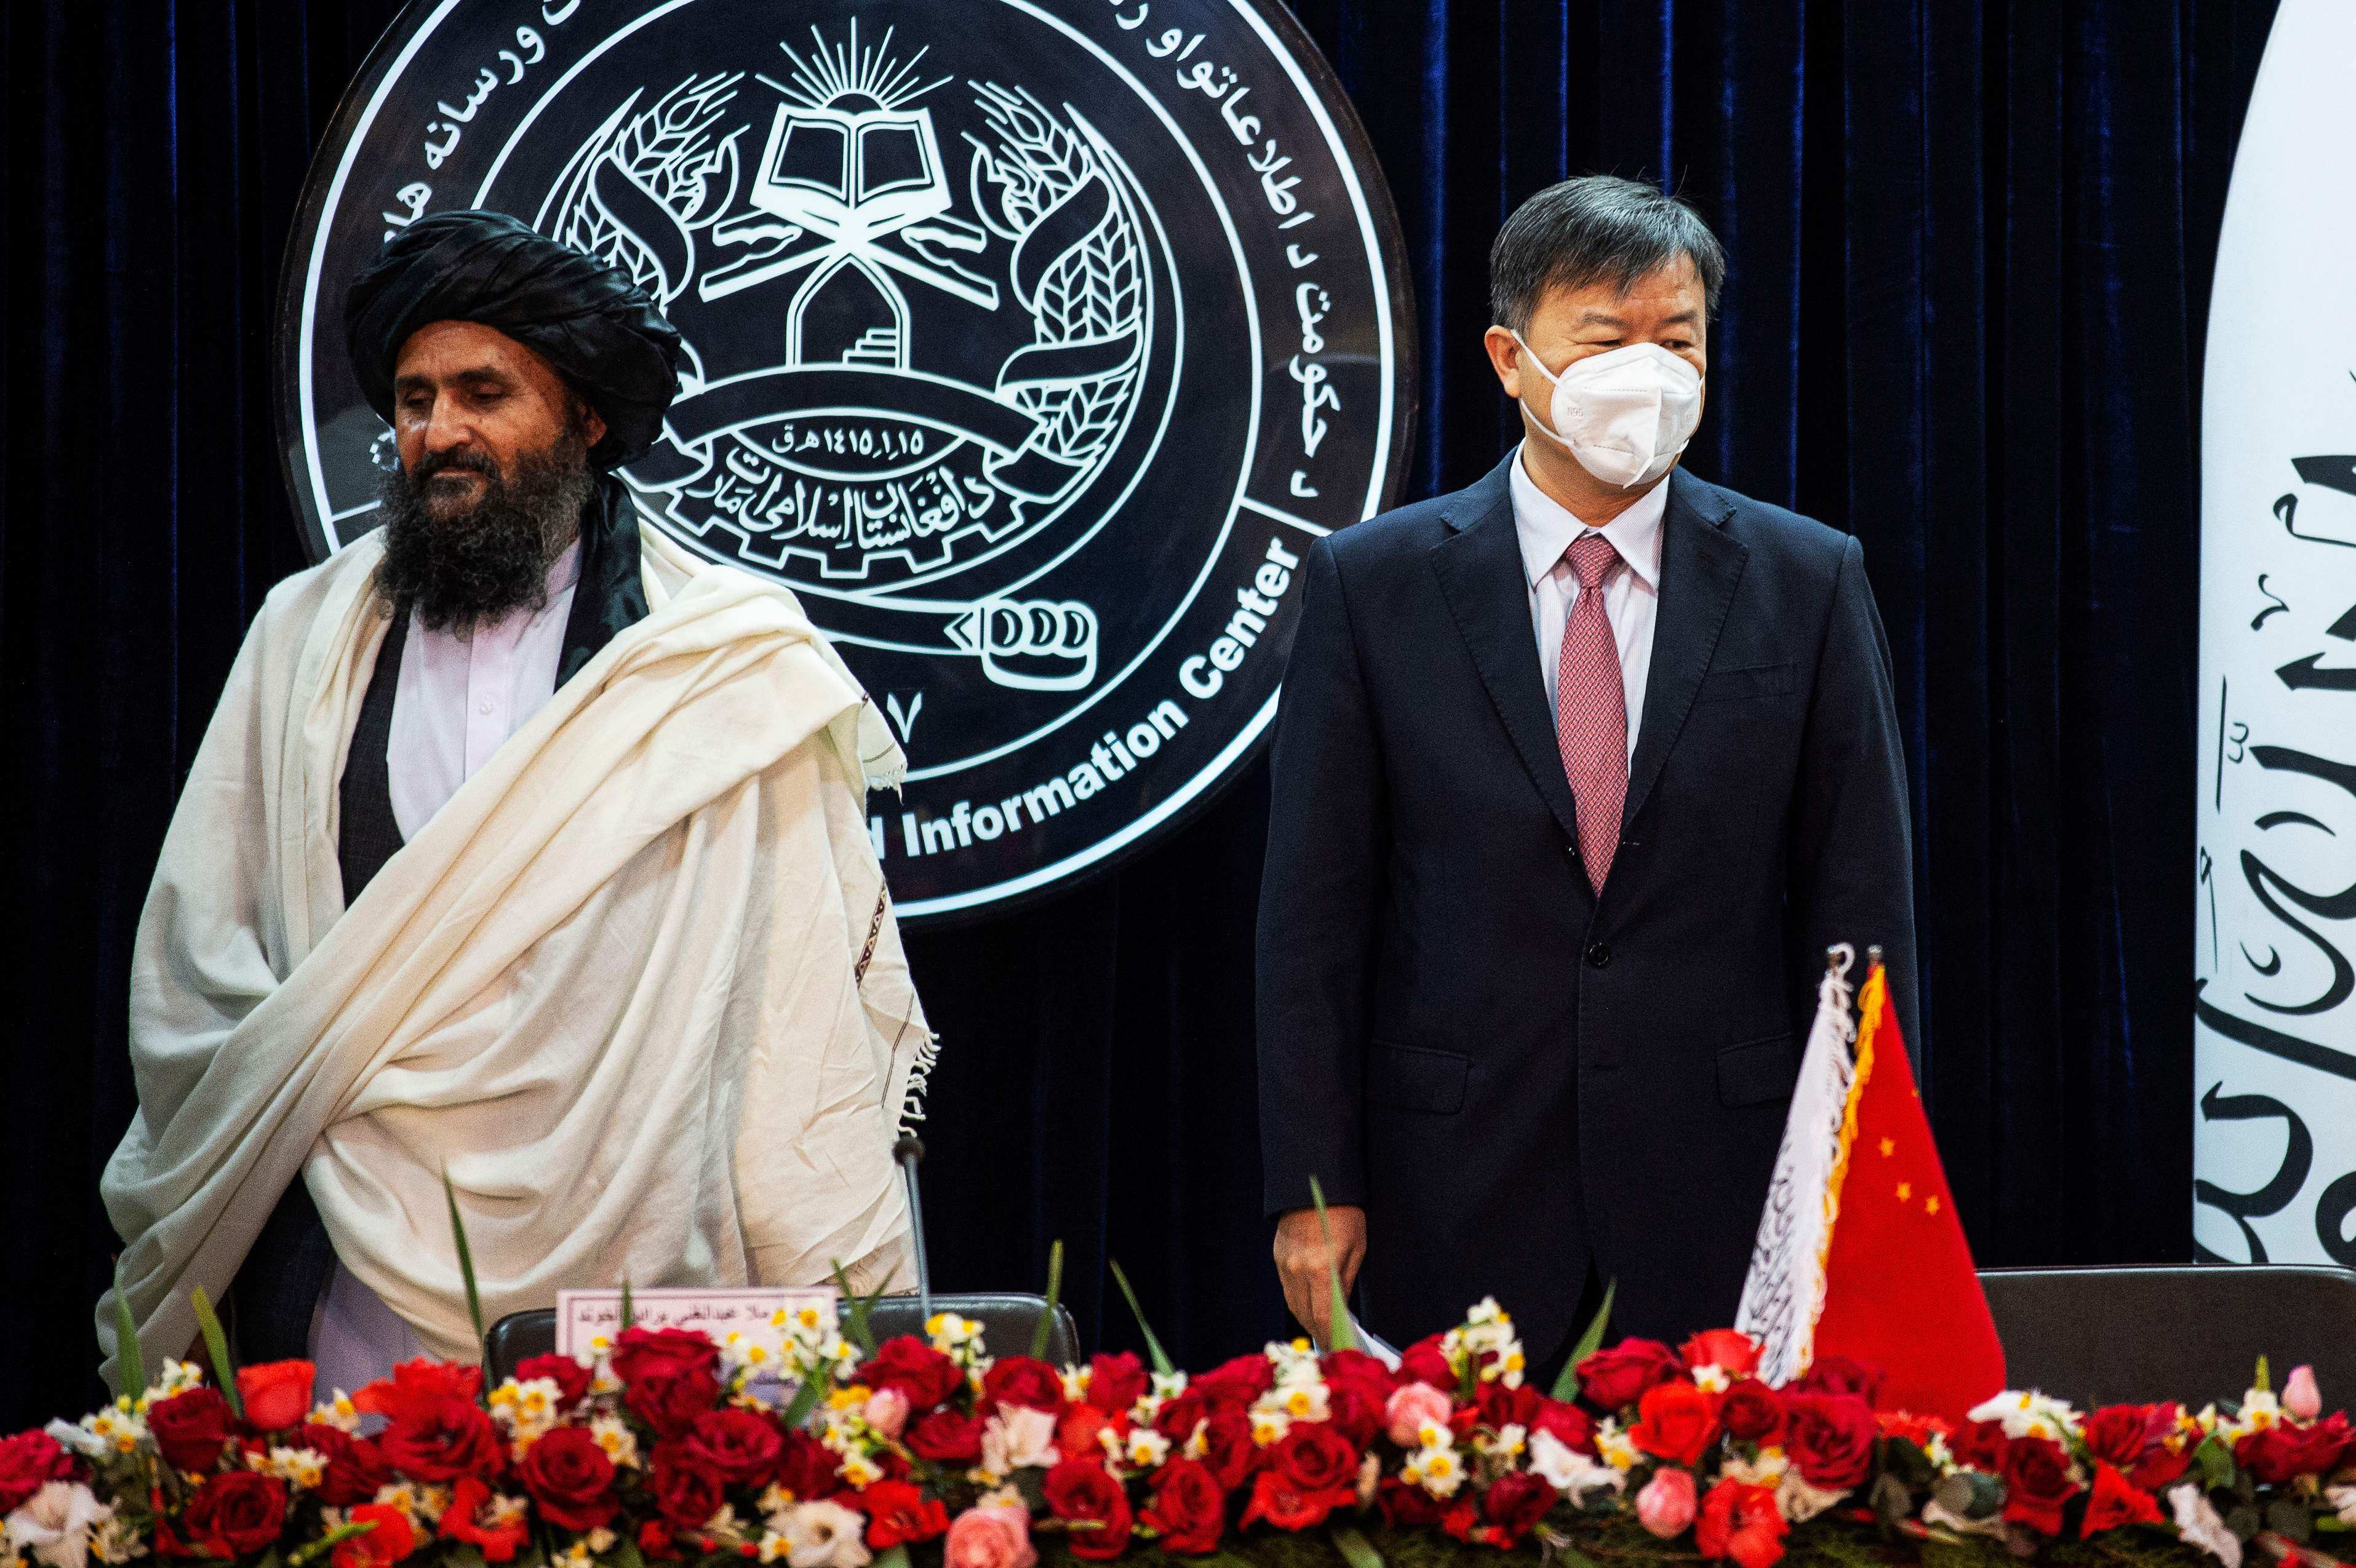 Afghanistan’s acting first deputy prime minister Abdul Ghani Baradar (left) and China’s ambassador to Afghanistan Wang Yu attend a press conference to announce an oil extraction contract with a Chinese company in Kabul on January 5, 2023. Photo: AFP